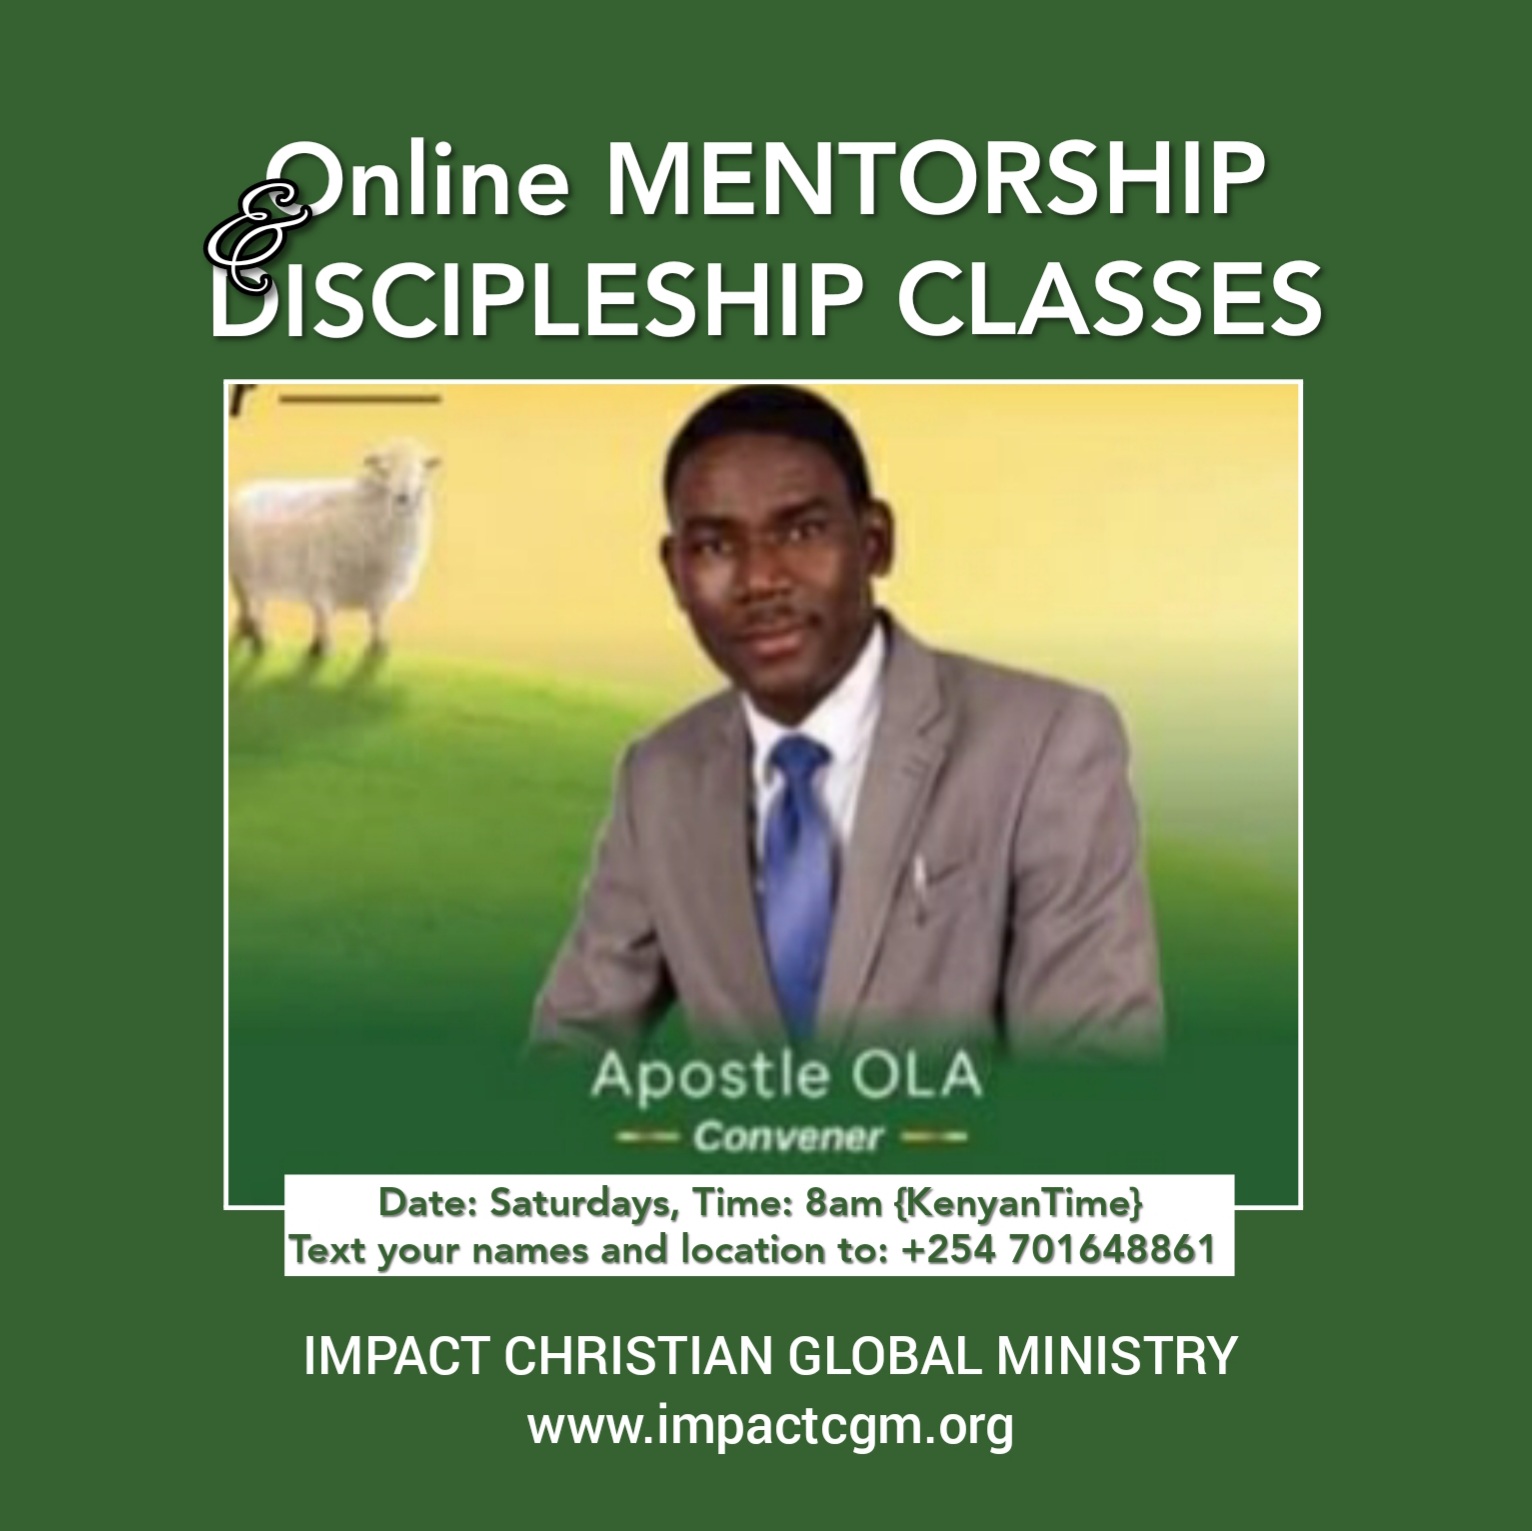 You are currently viewing Online MENTORSHIP AND DISCIPLESHIP CLASSES with Apostle Ola.